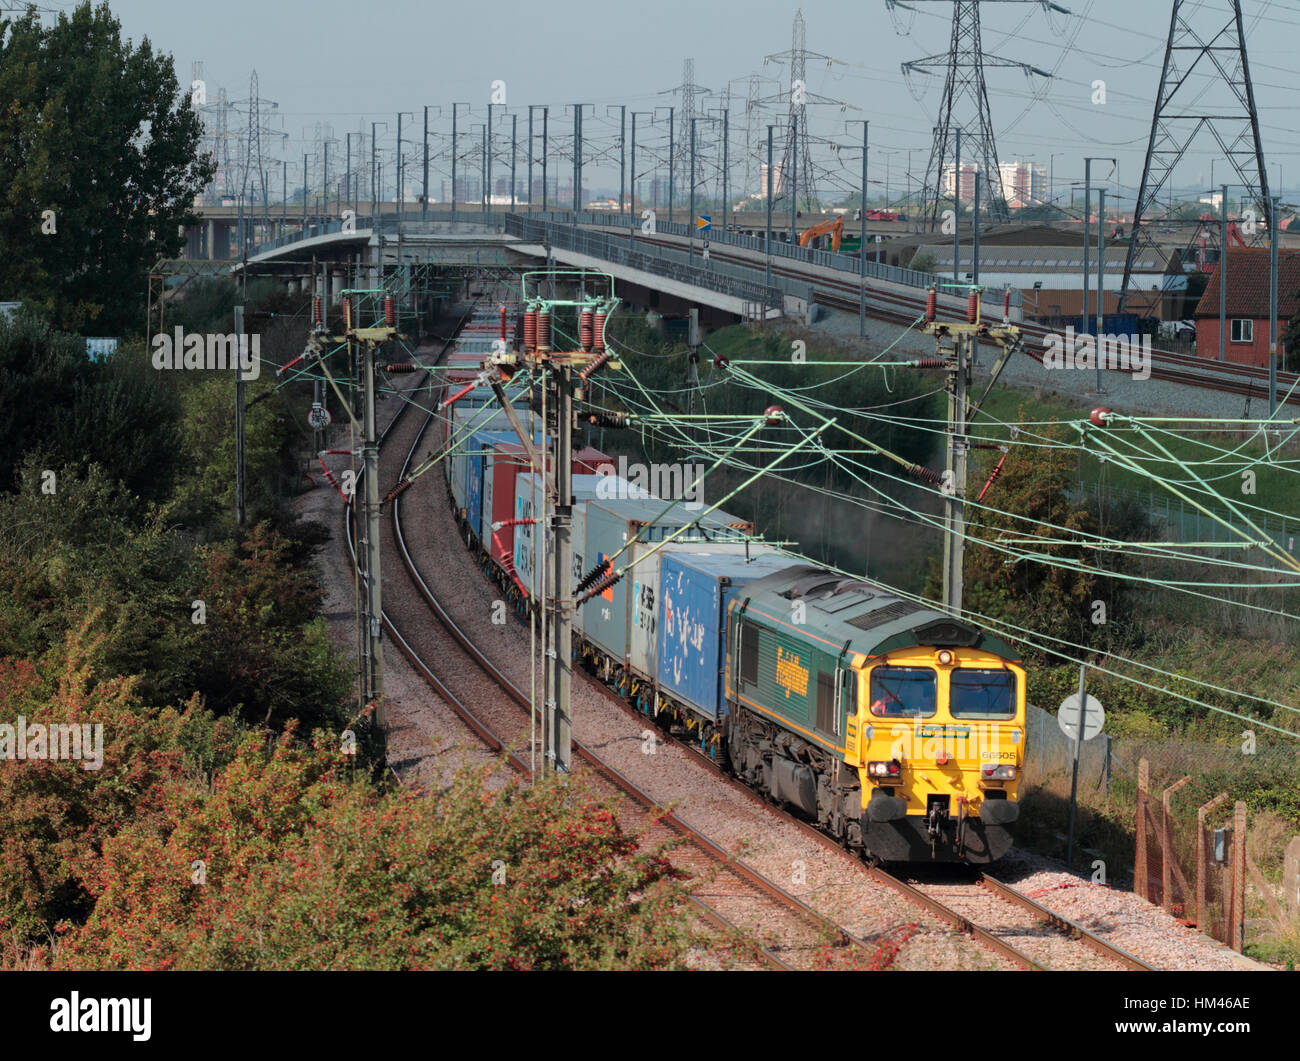 66505 working a freightliner train near Purfleet on the 21st September 2010. Stock Photo